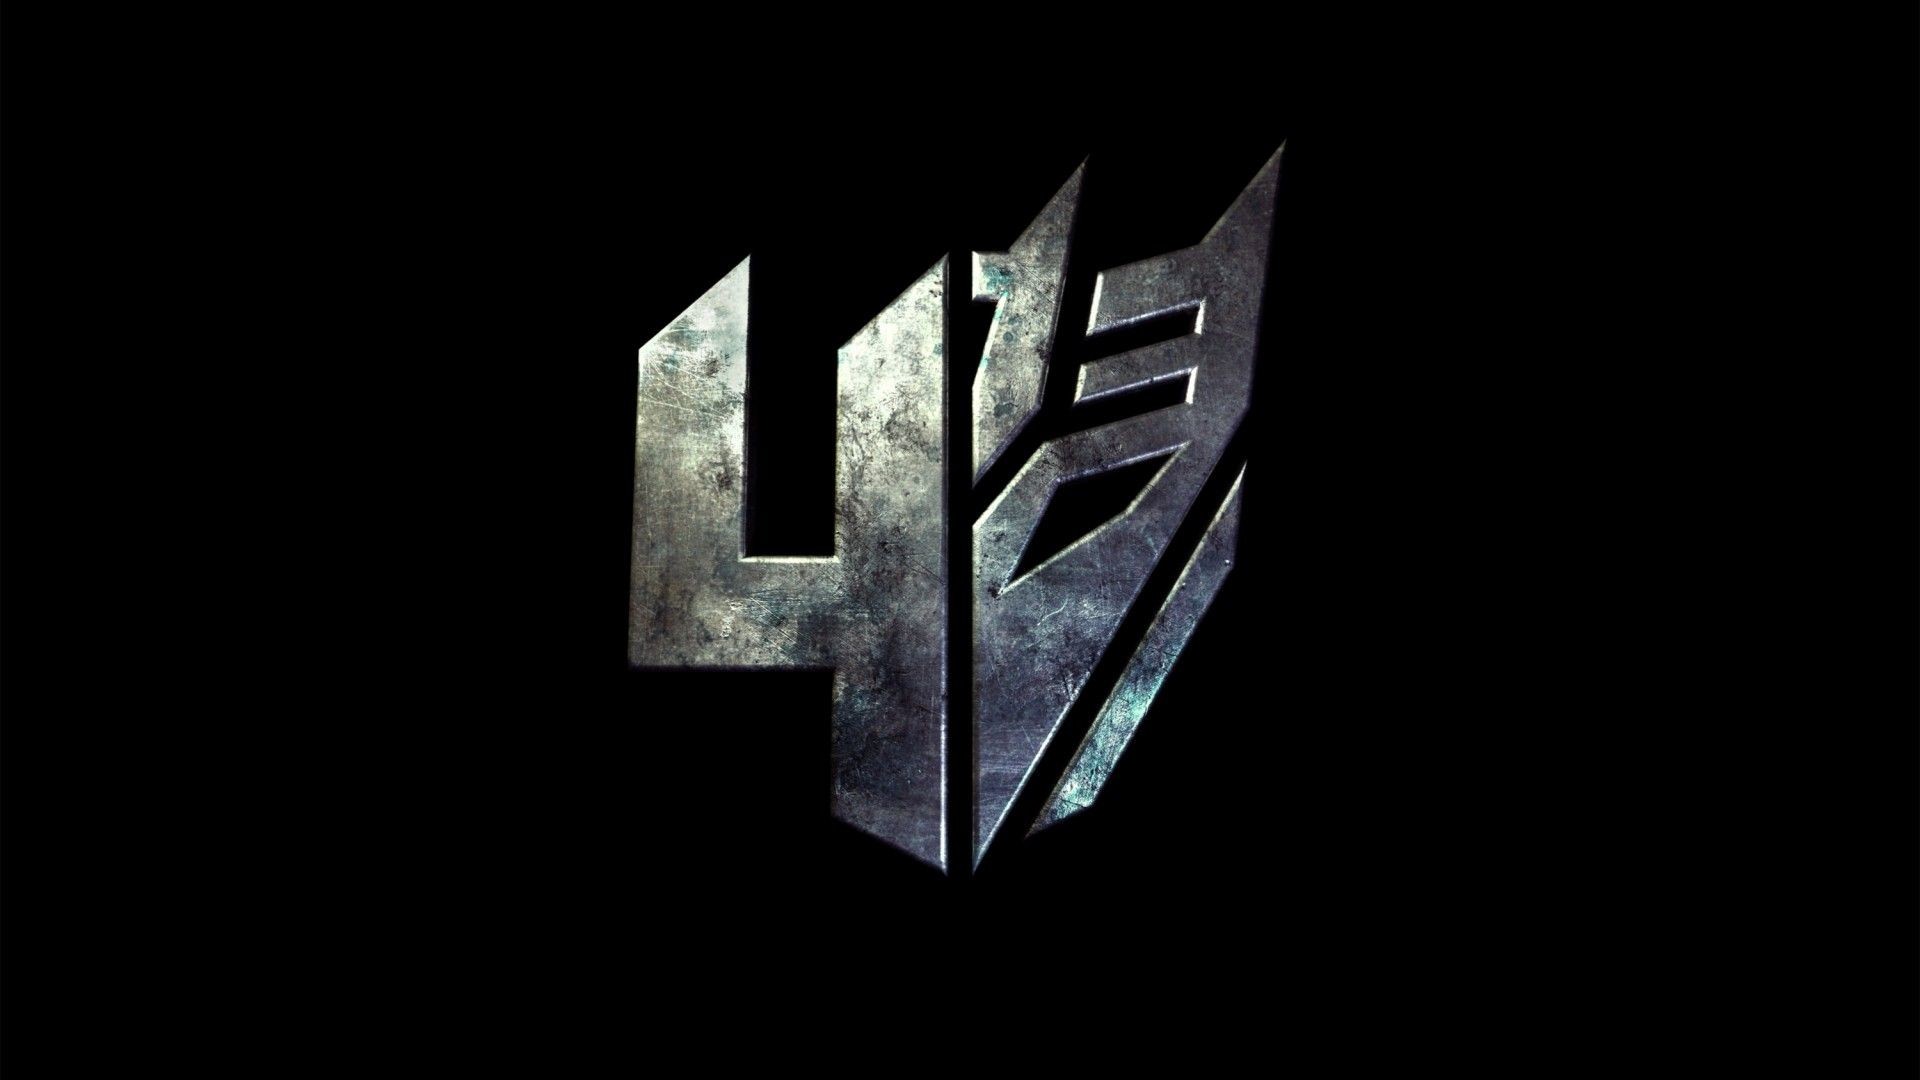 1920x1080 Transformers Age of Extinction HQ Movie Wallpapers 640Ã640 Wallpapers  Transformer 4 (45 Wallpapers